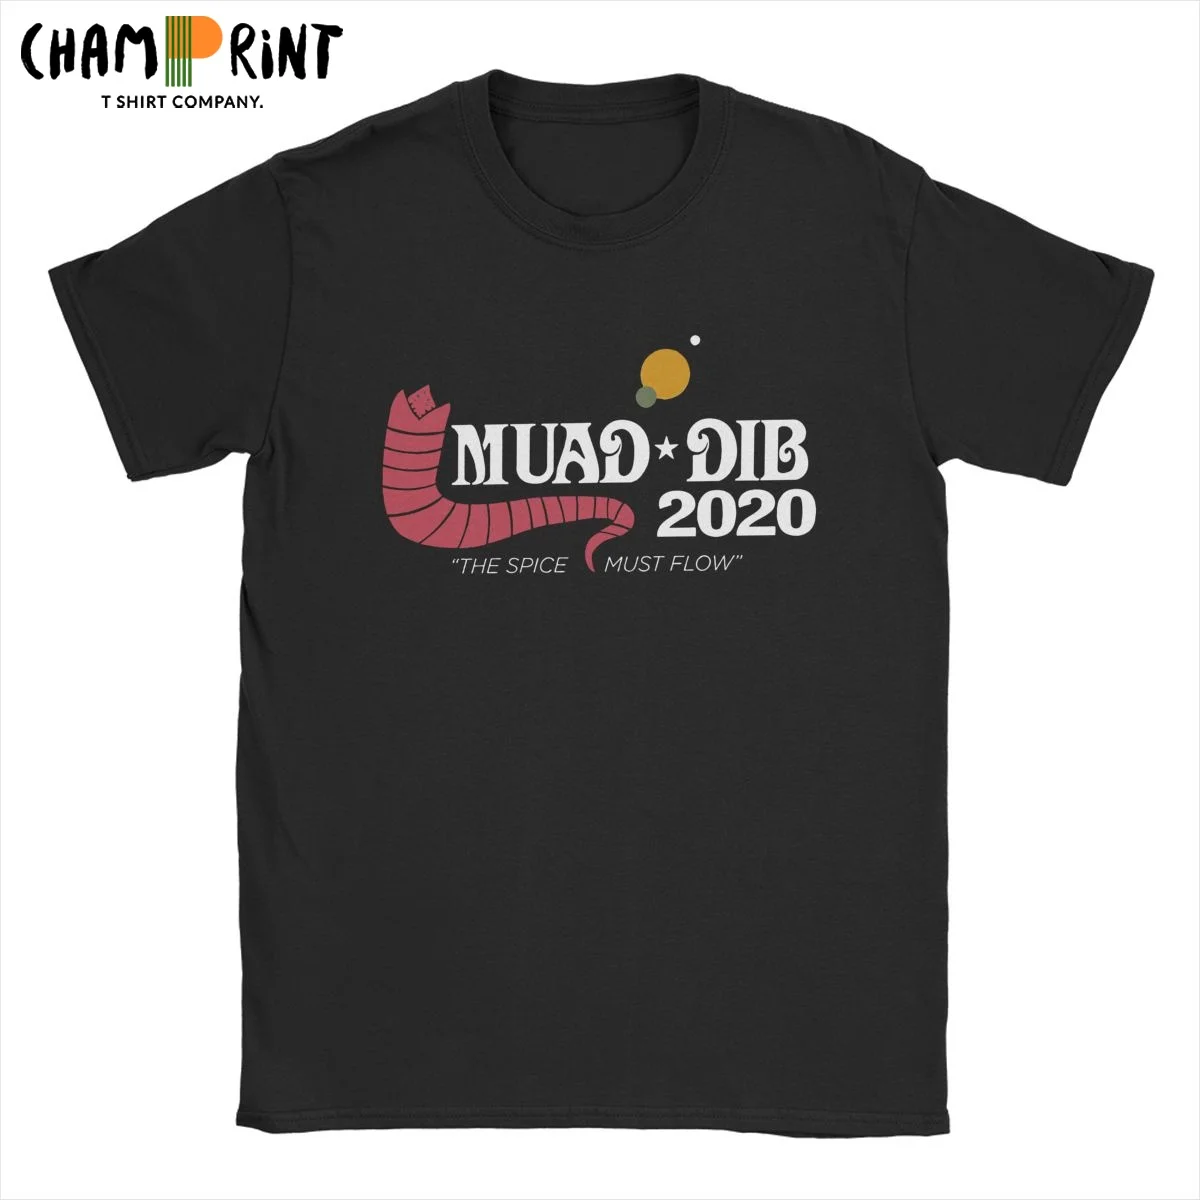 

Dune Muad'Dib 2020 T Shirt for Men Pure Cotton Fashion T-Shirt O Neck Scifi Movie Tees Short Sleeve Tops Adult